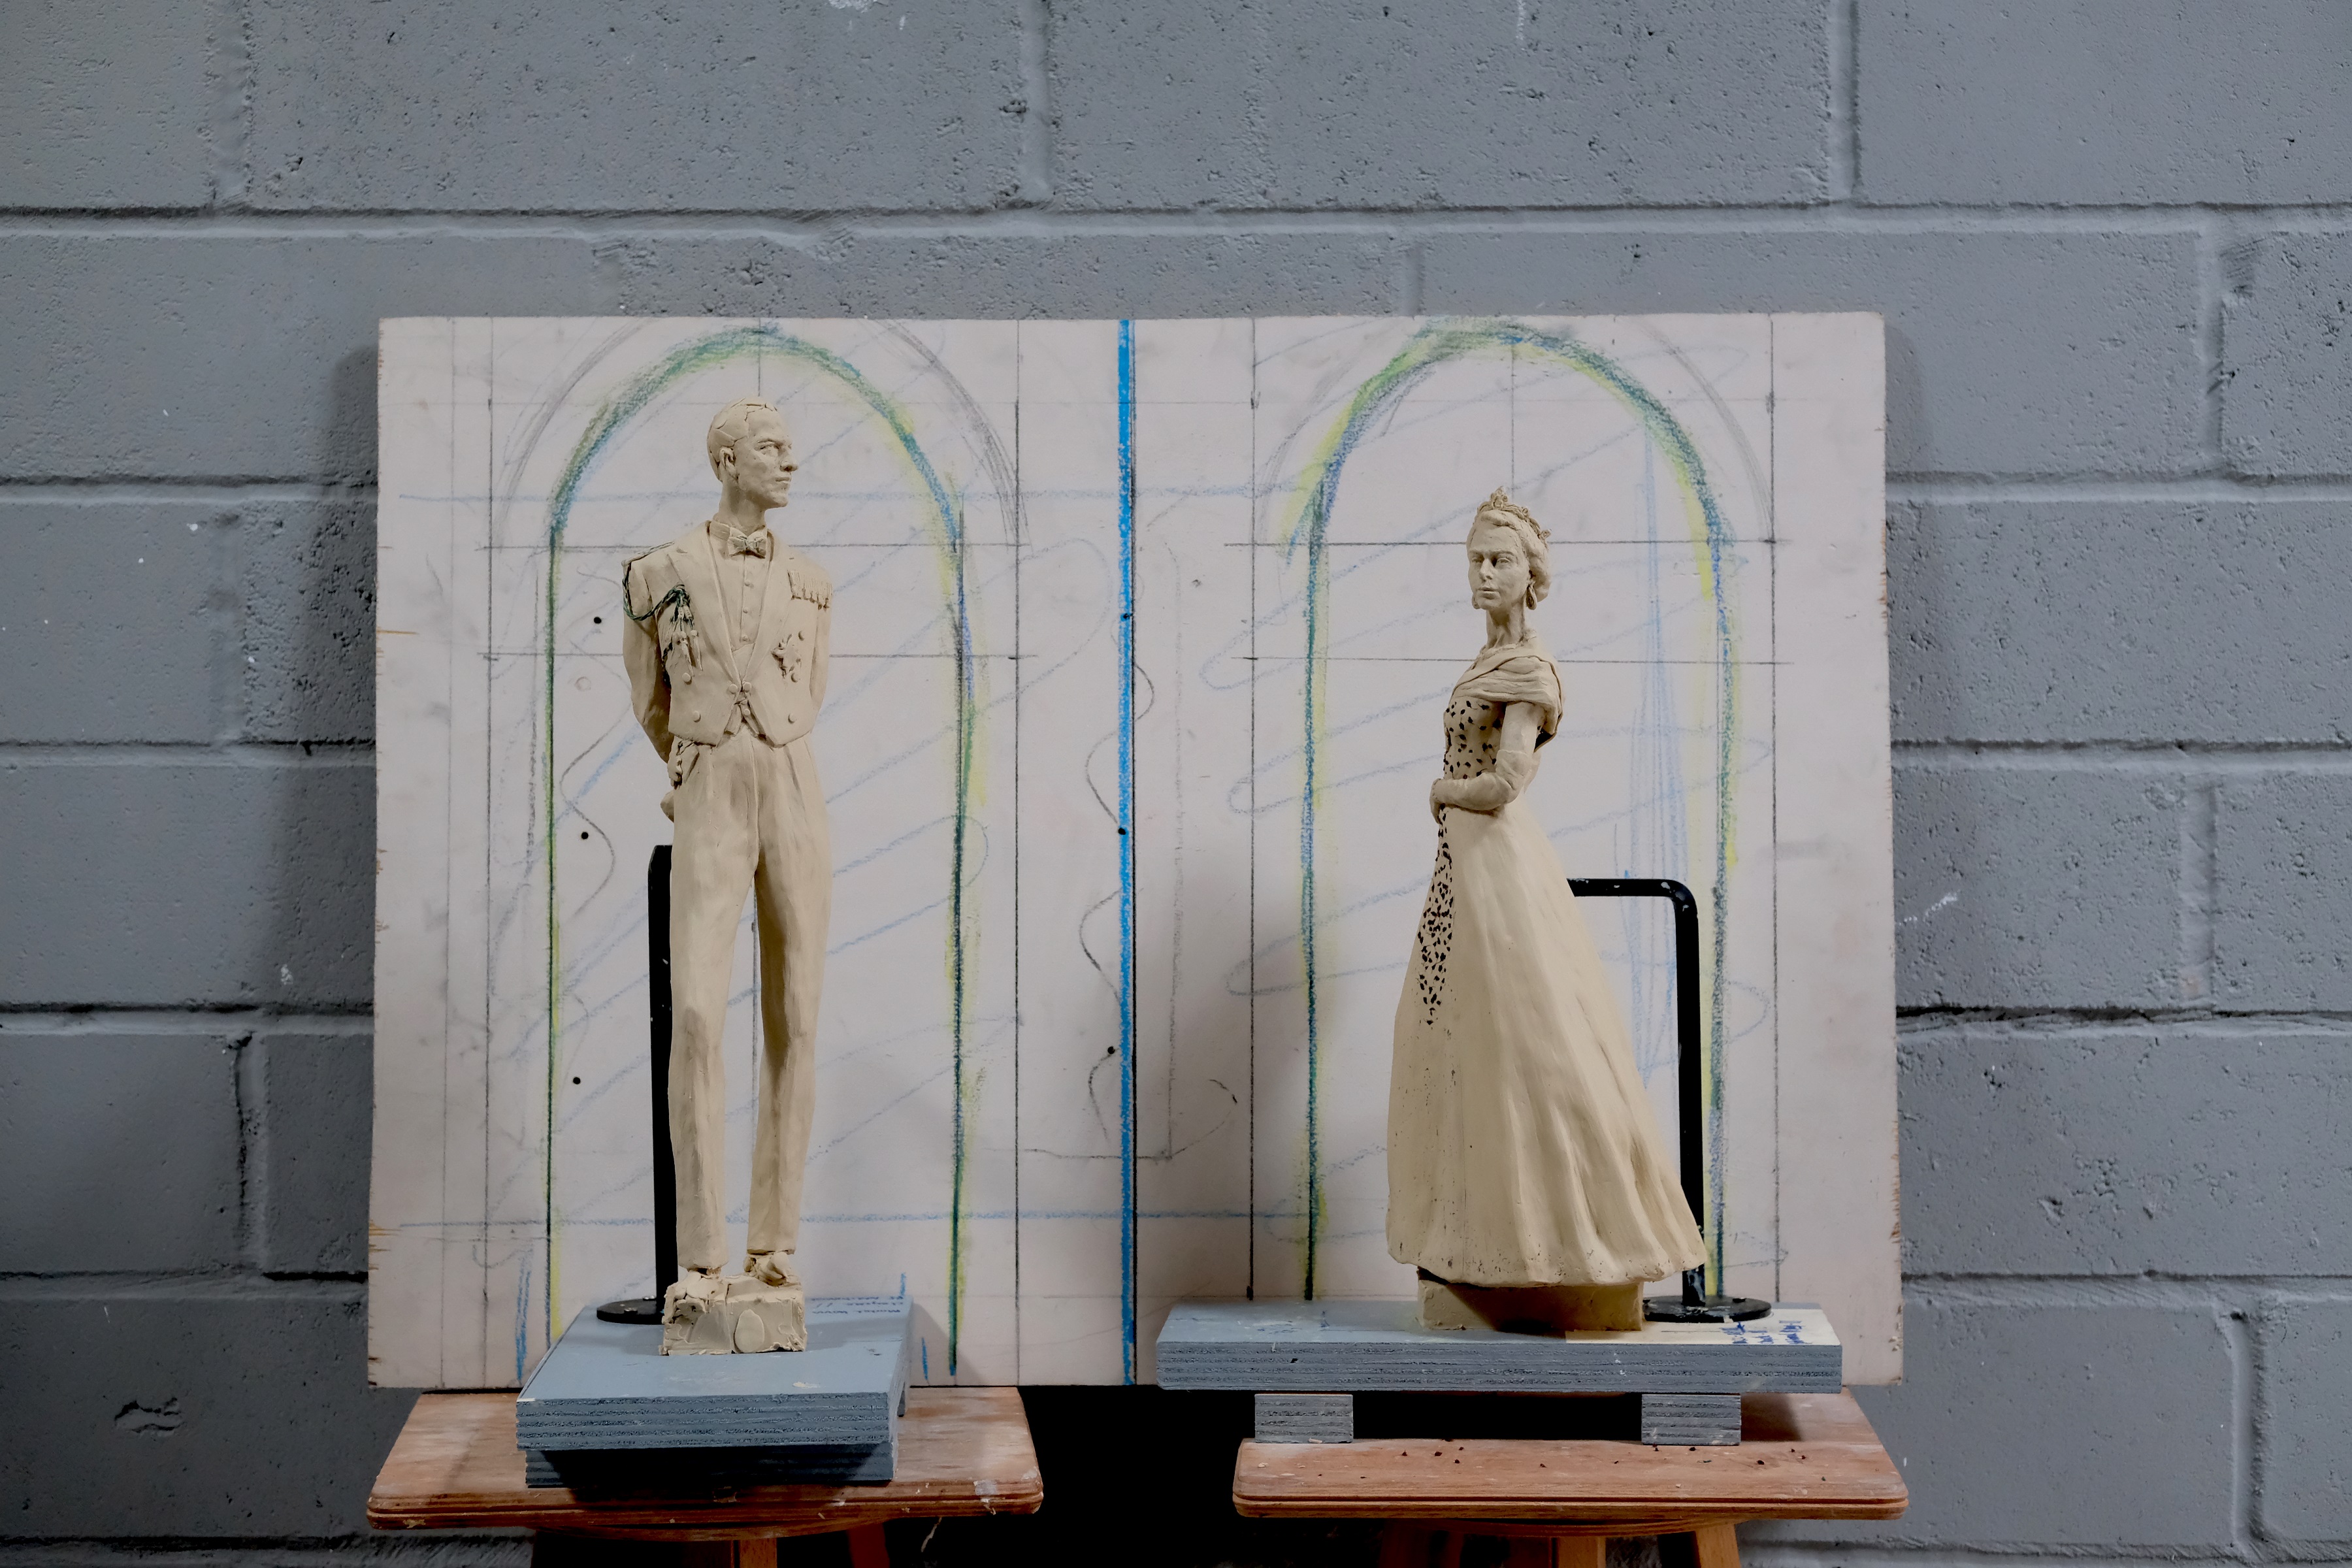 Models of Philip and the Queen made as part of the design process